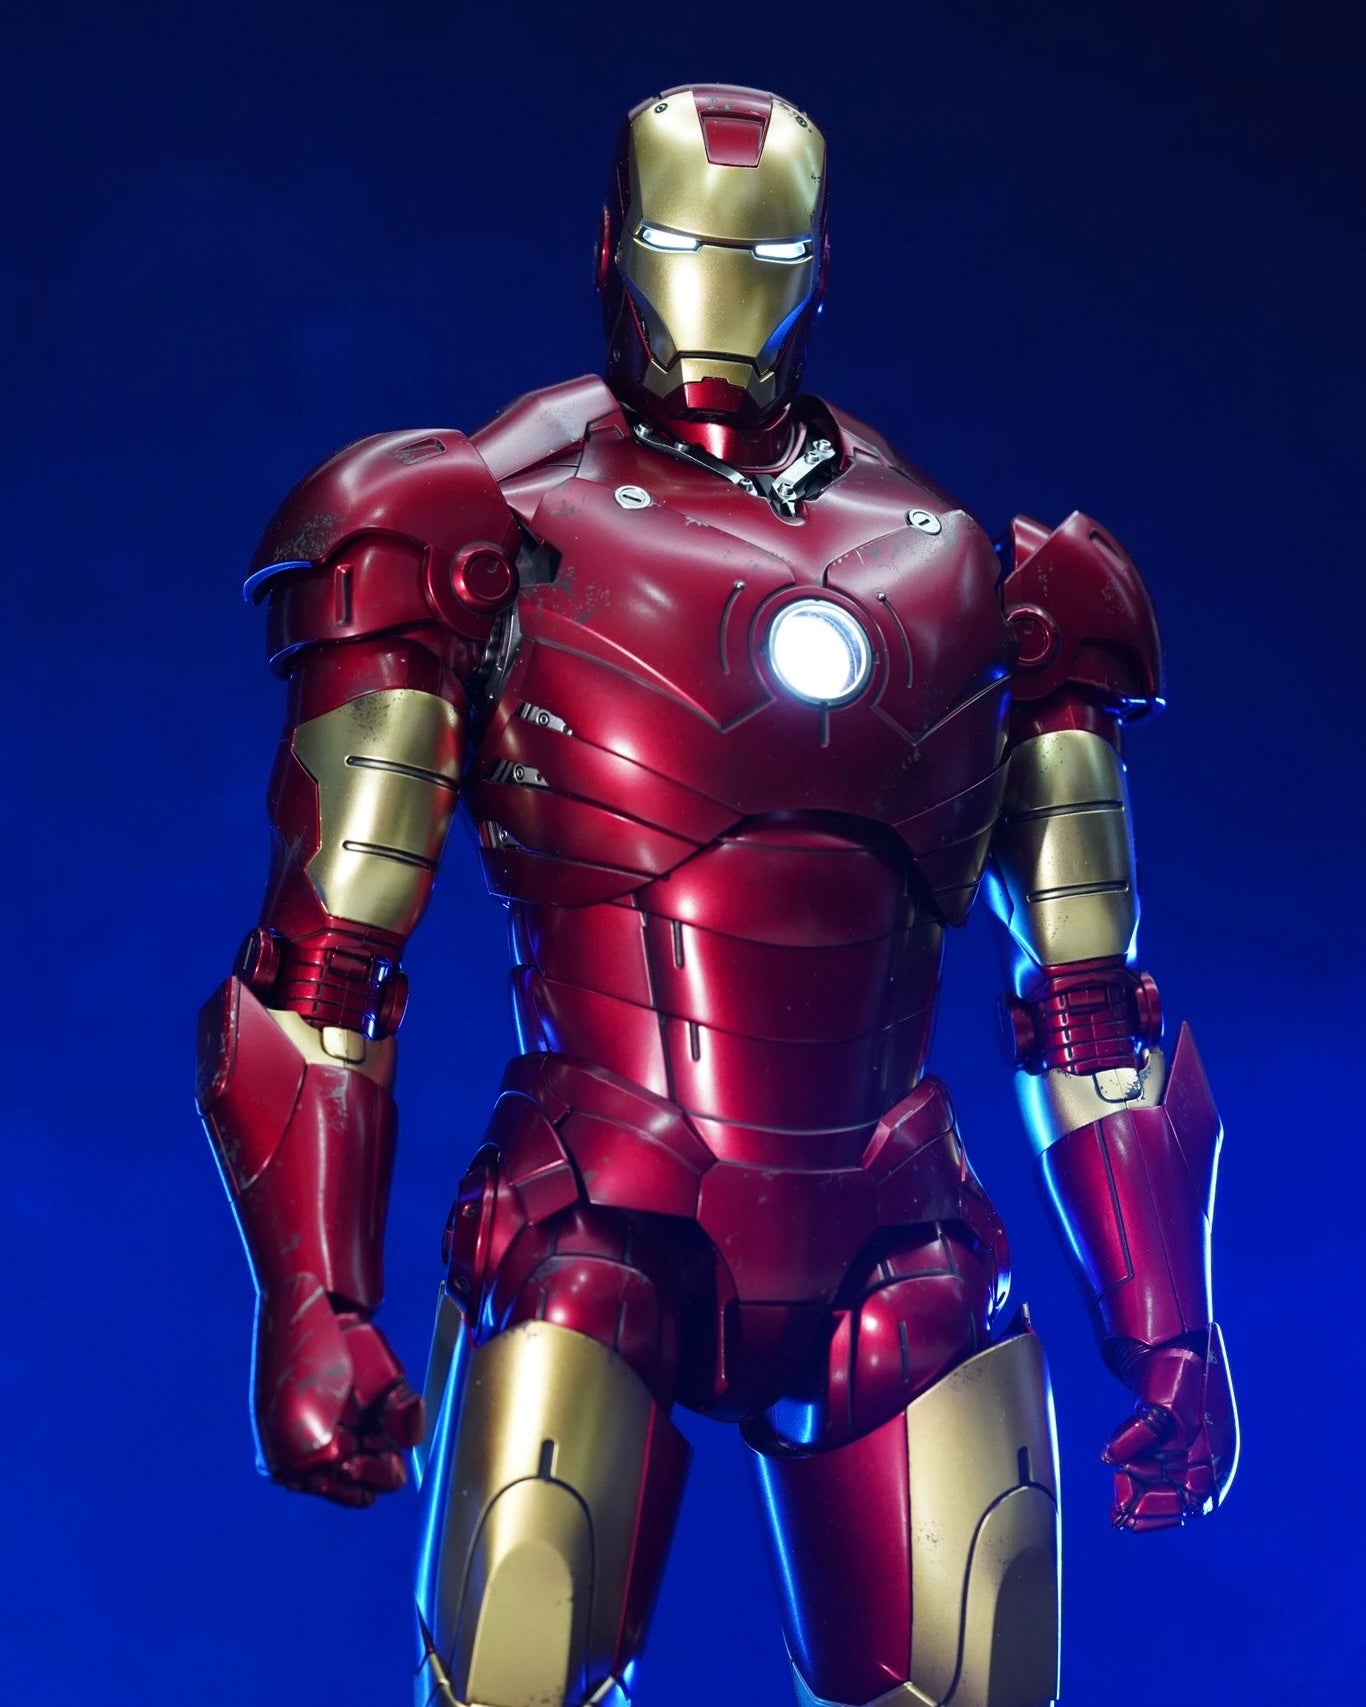 Iron Man Mark III 2.0 Diecast Sixth Scale Figure by Hot Toys